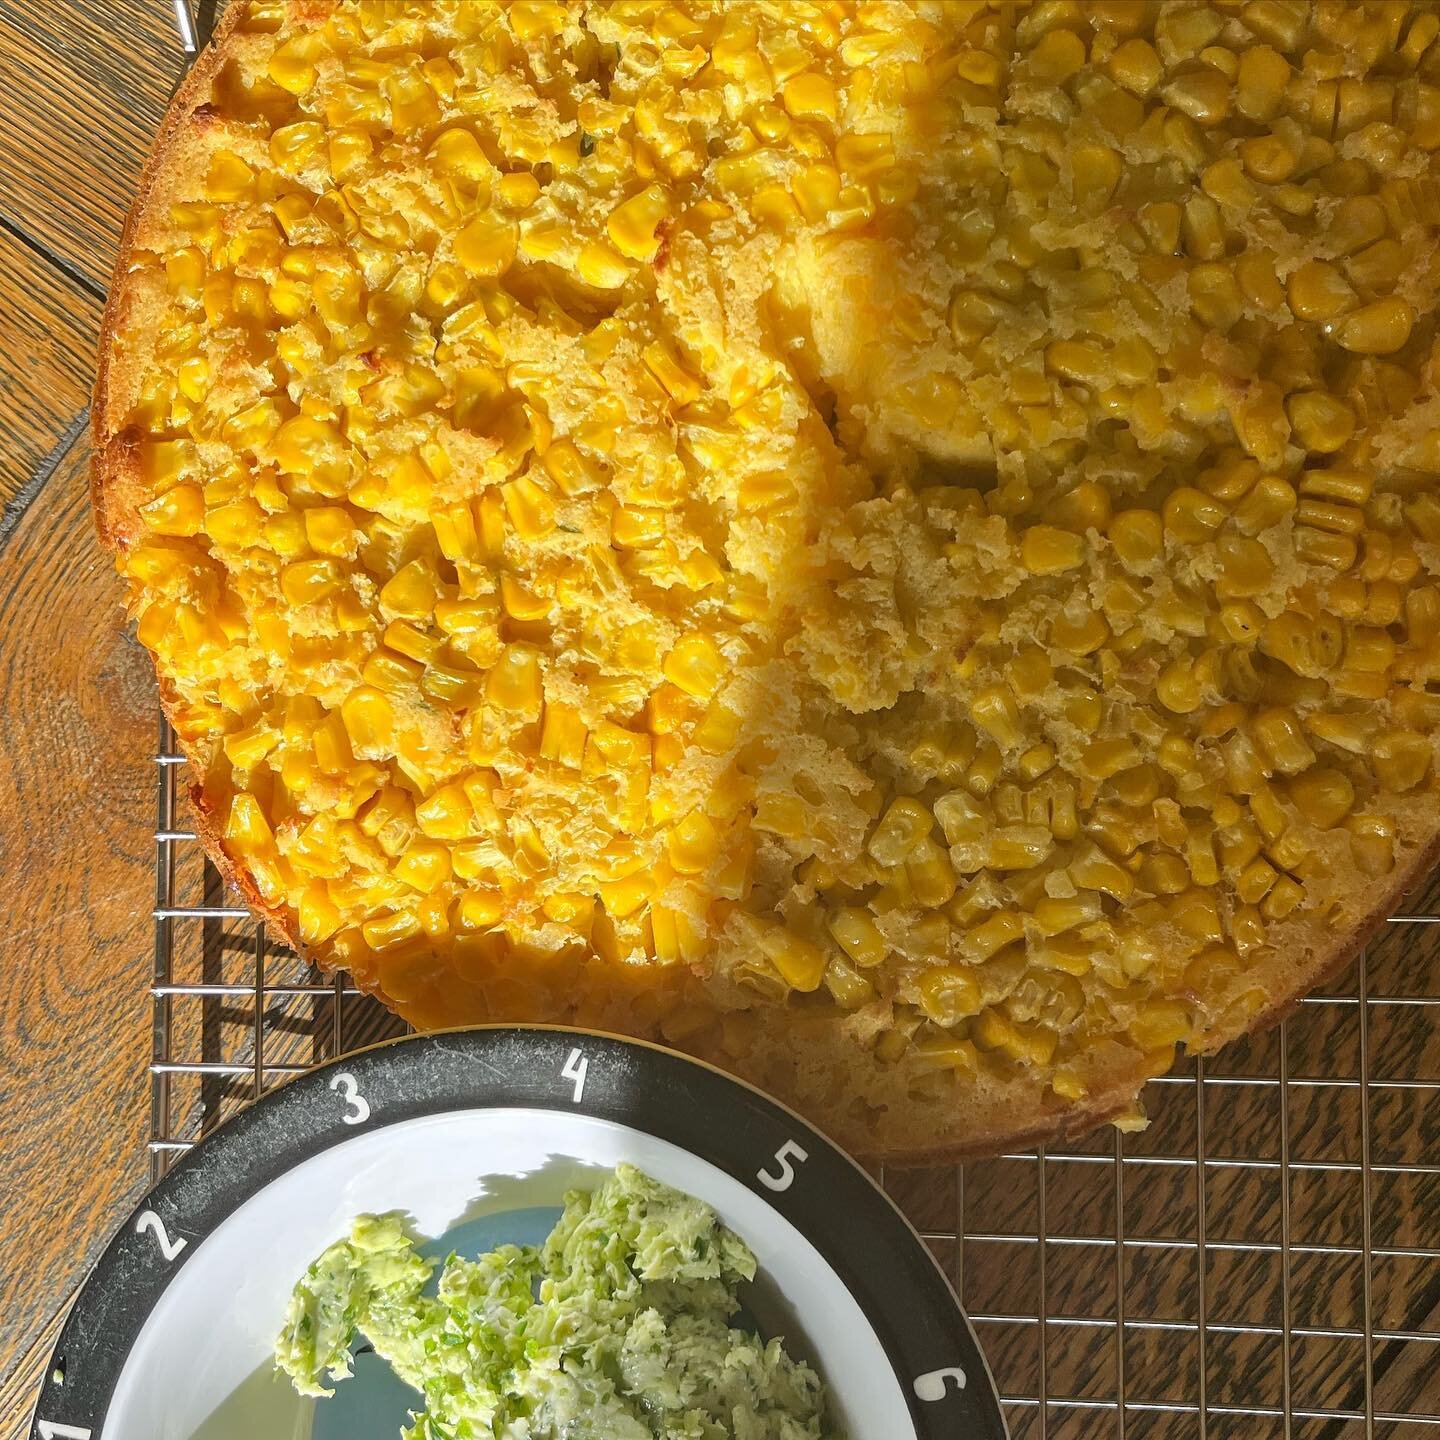 Sunny delights in the form of cornbread with jalape&ntilde;o, thyme and spring onion butter. 
.
.
.
#cornbread #eaatttssss #cookbookwriting #recipetesting #bloopers #food52